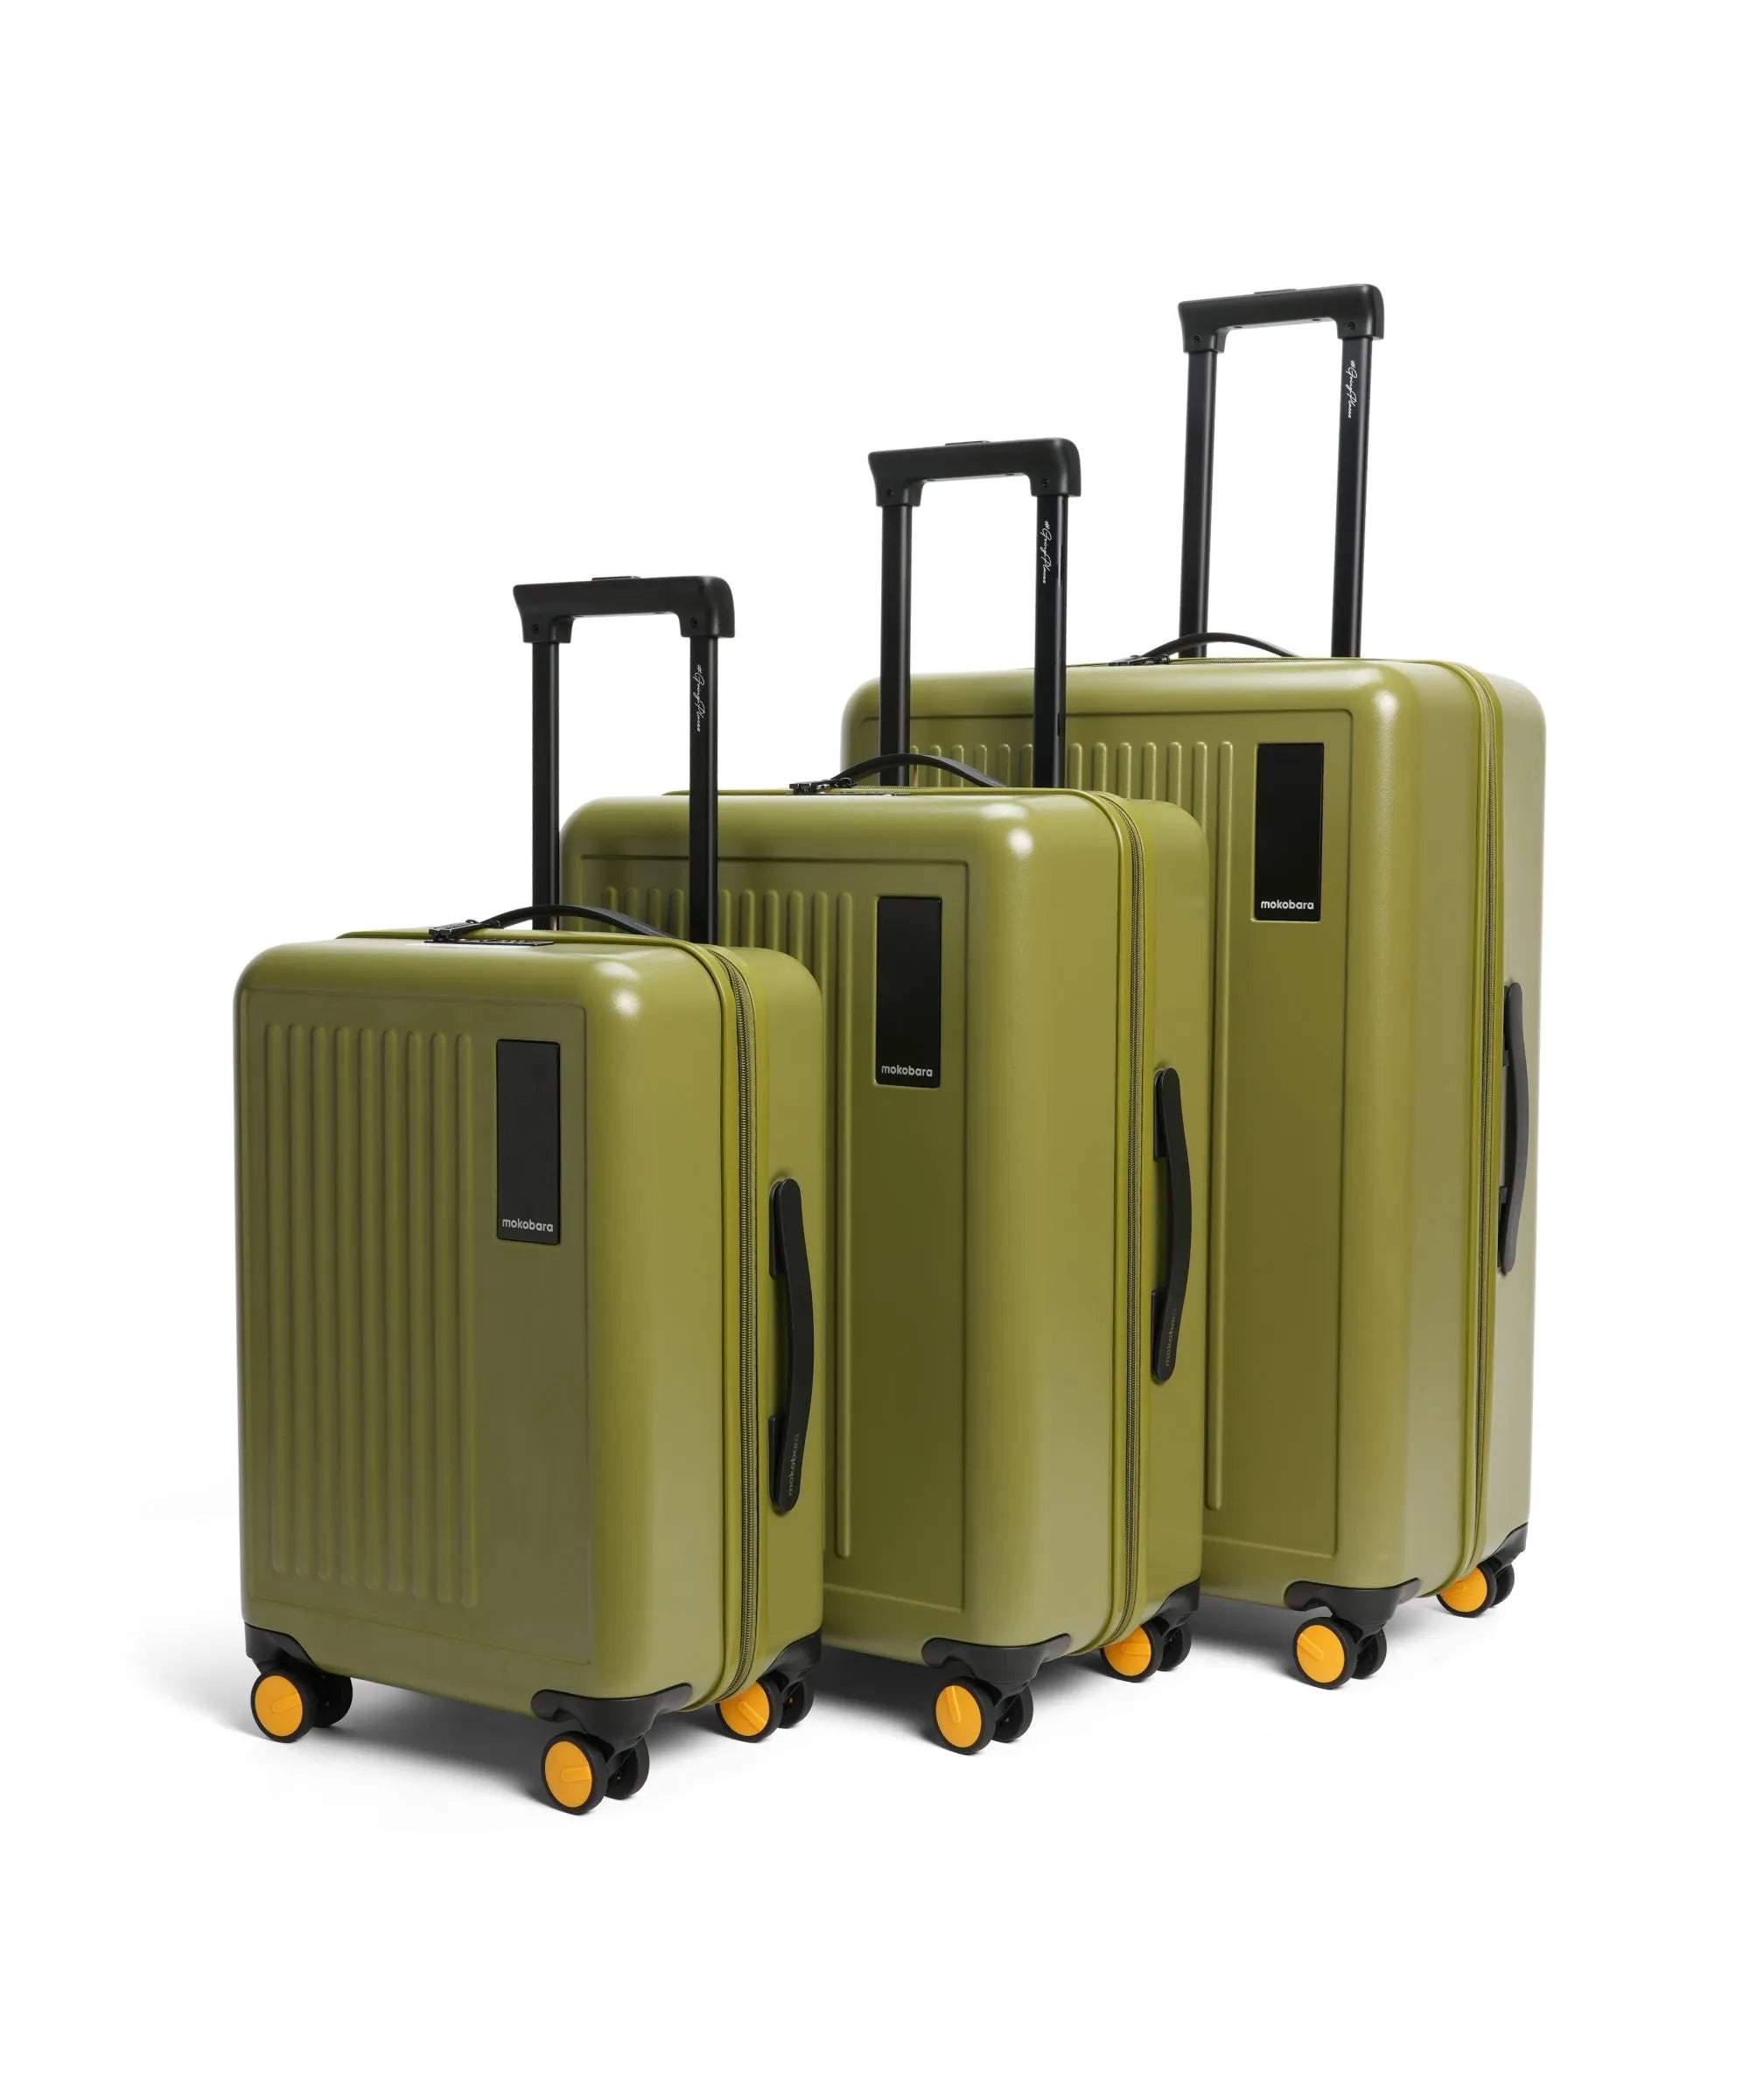 Color_So Matcha | The Transit Luggage - Set of 3